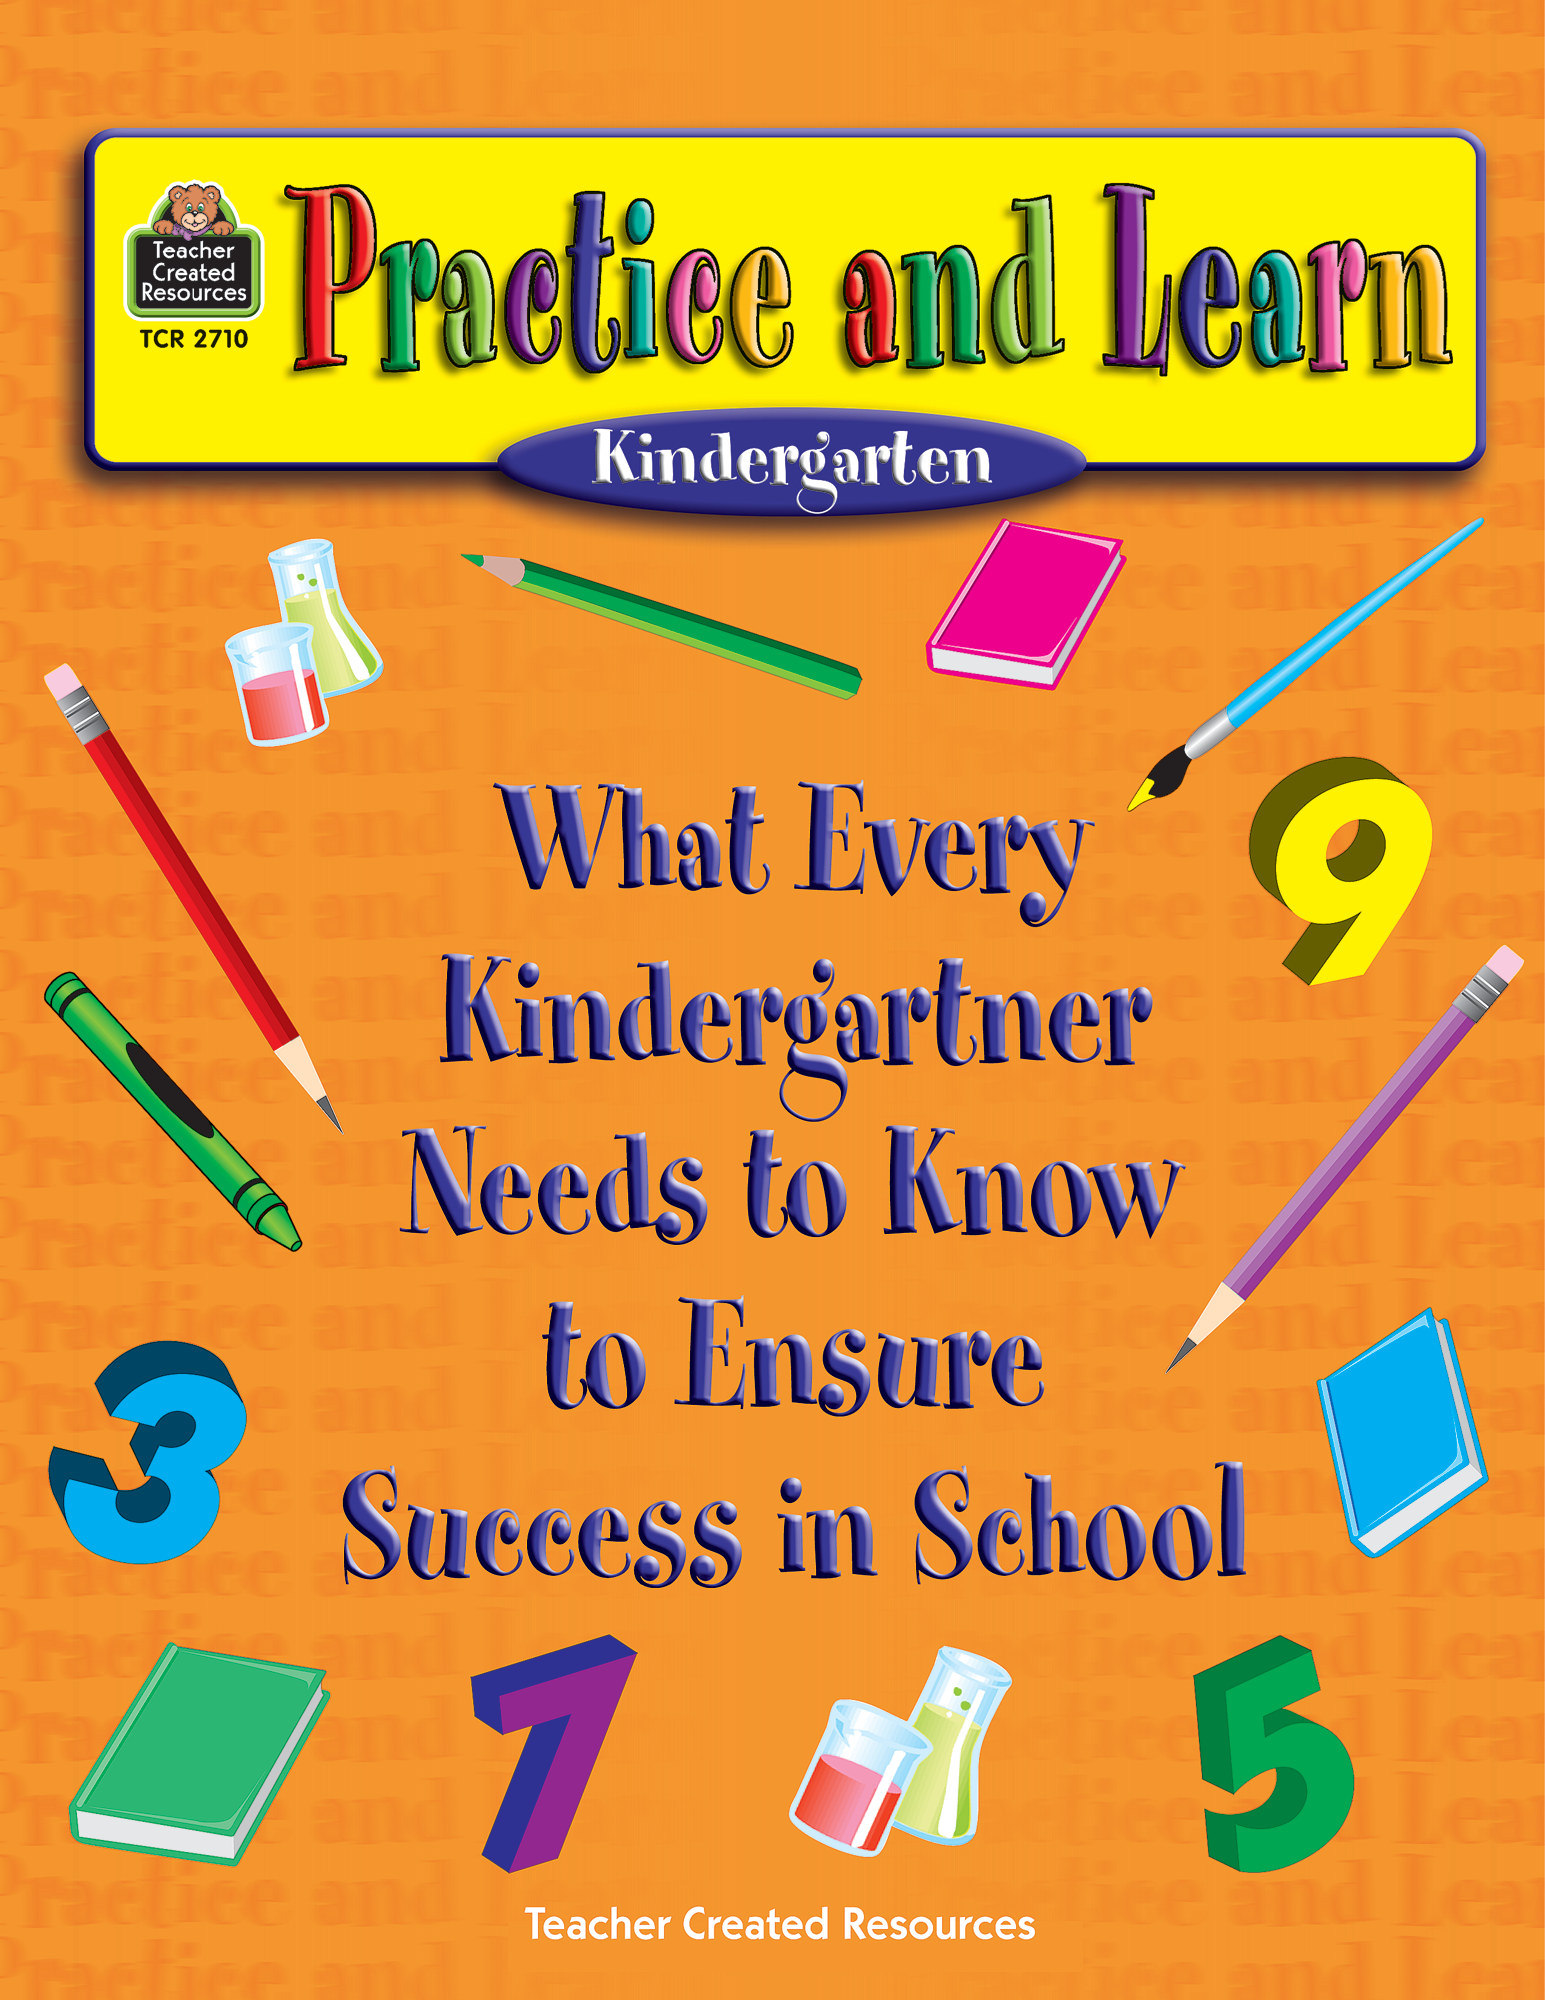 practice-and-learn-kindergarten-tcr2710-teacher-created-resources